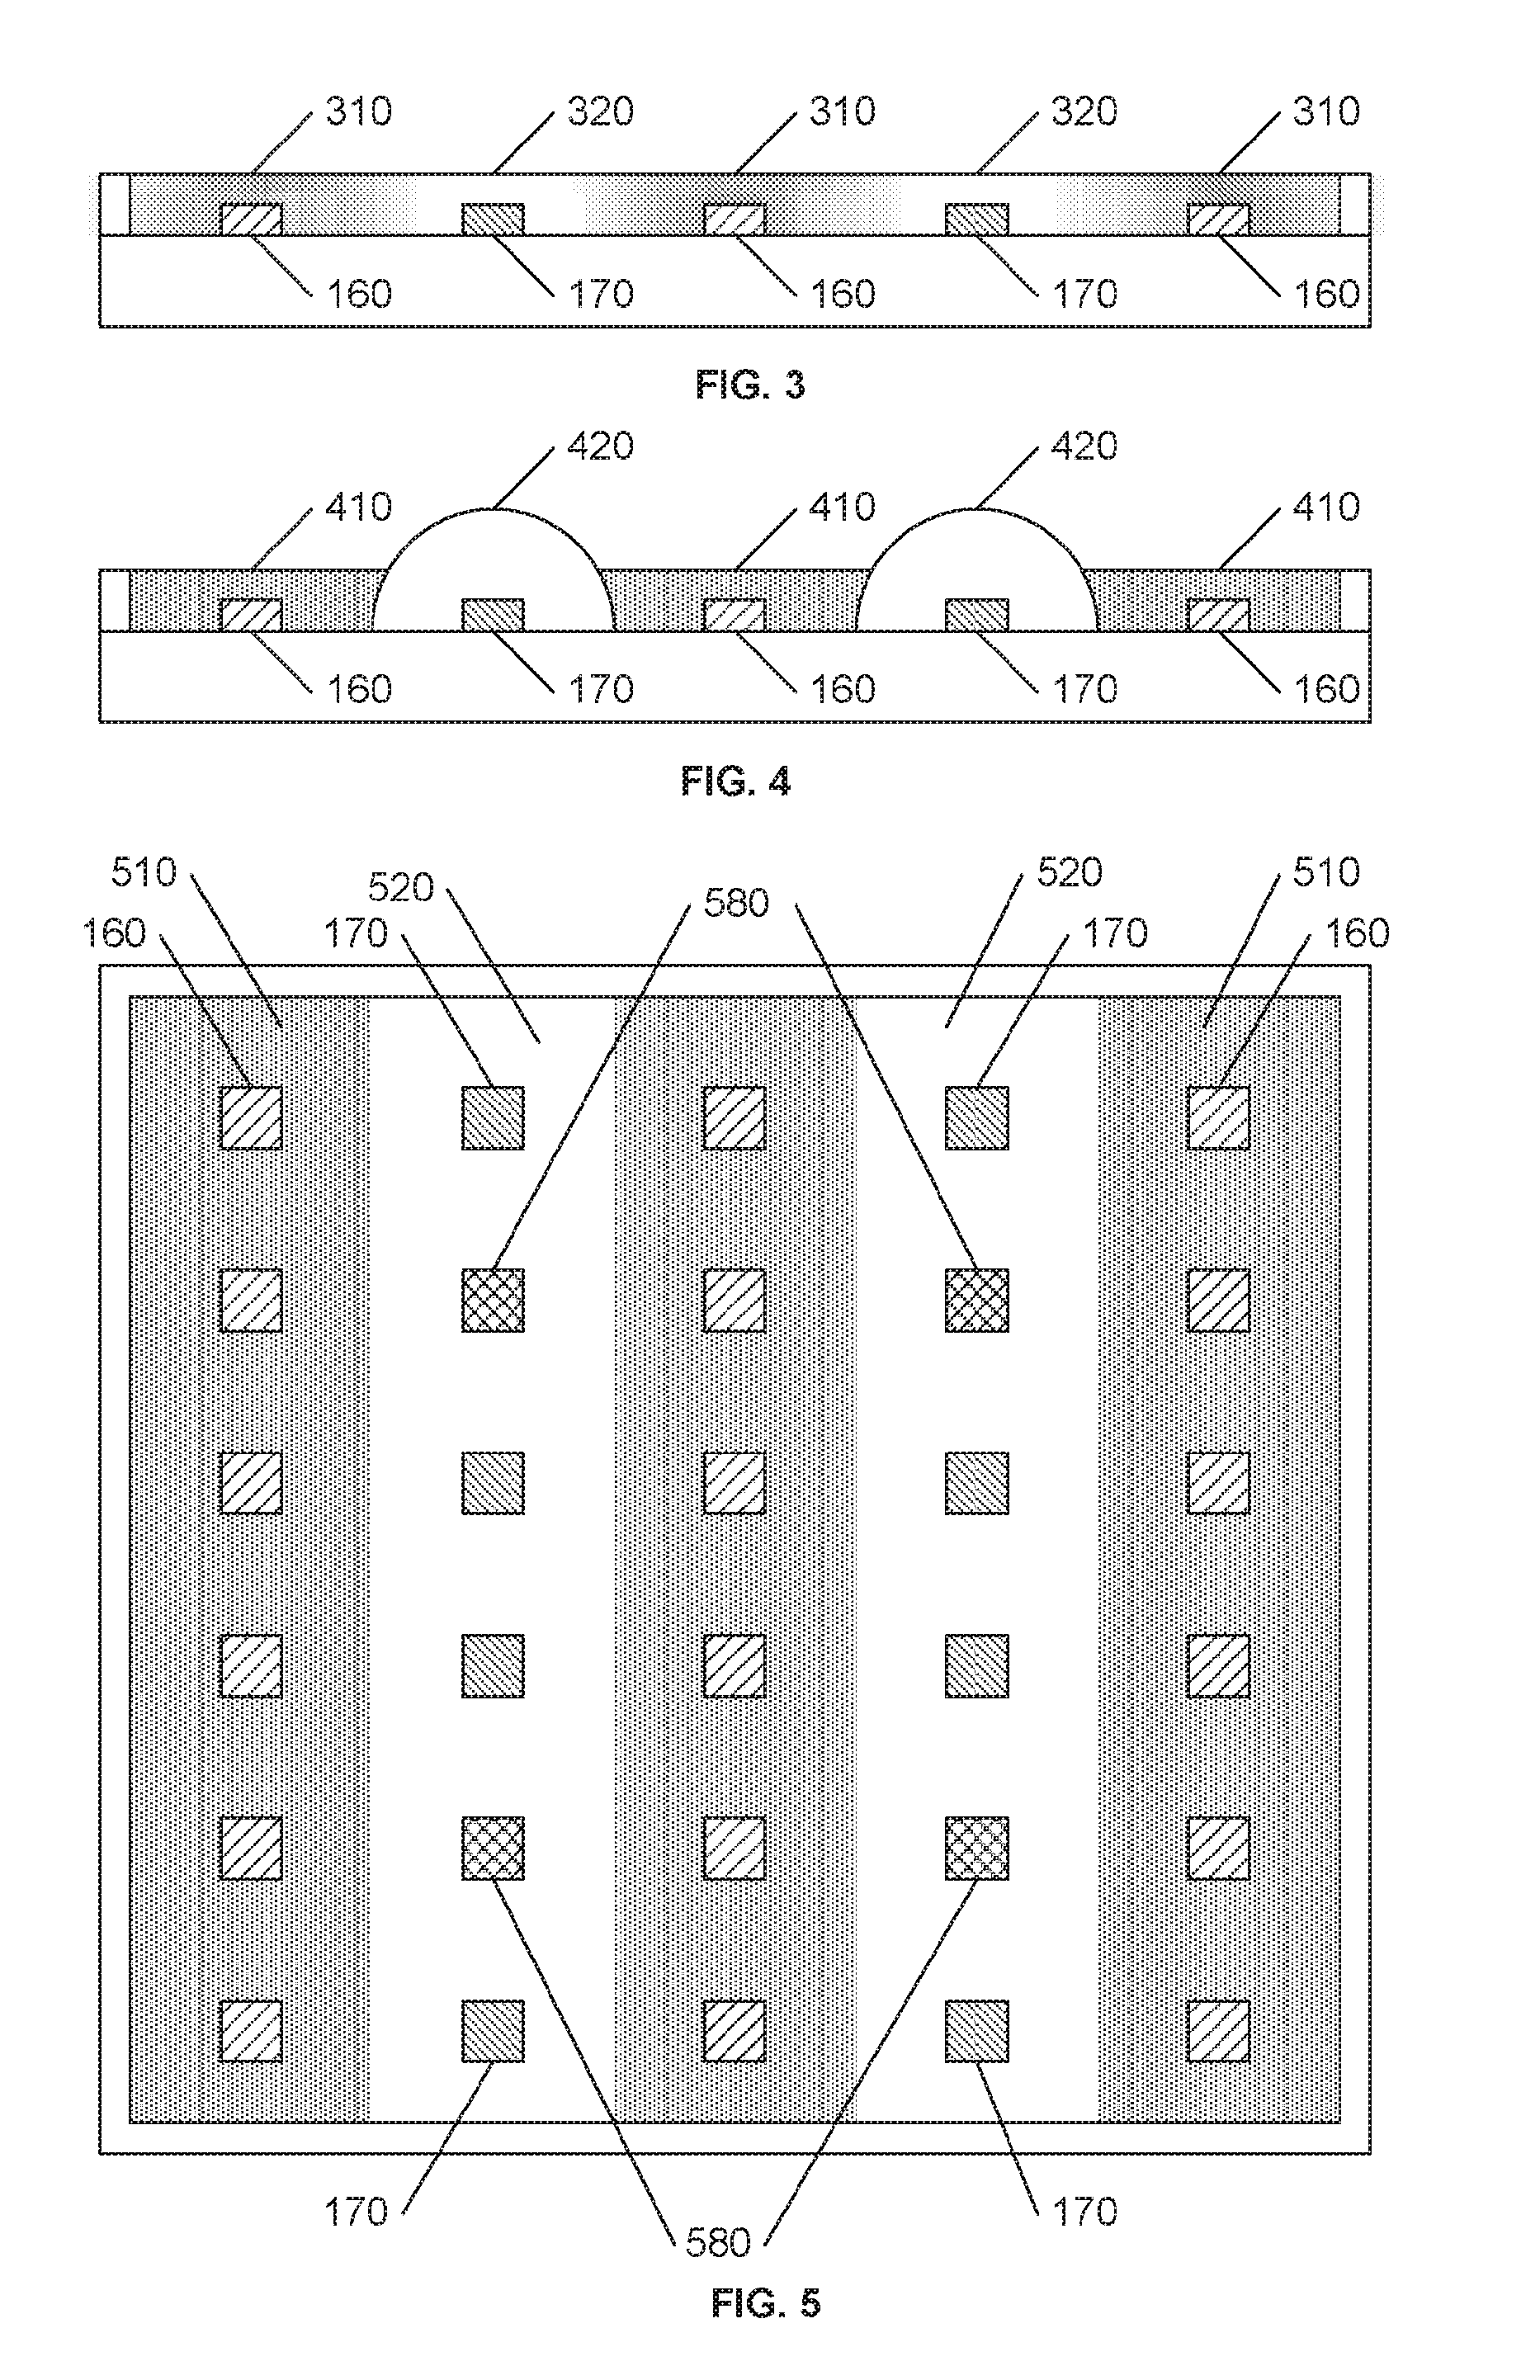 Hybrid chip-on-board LED module with patterned encapsulation